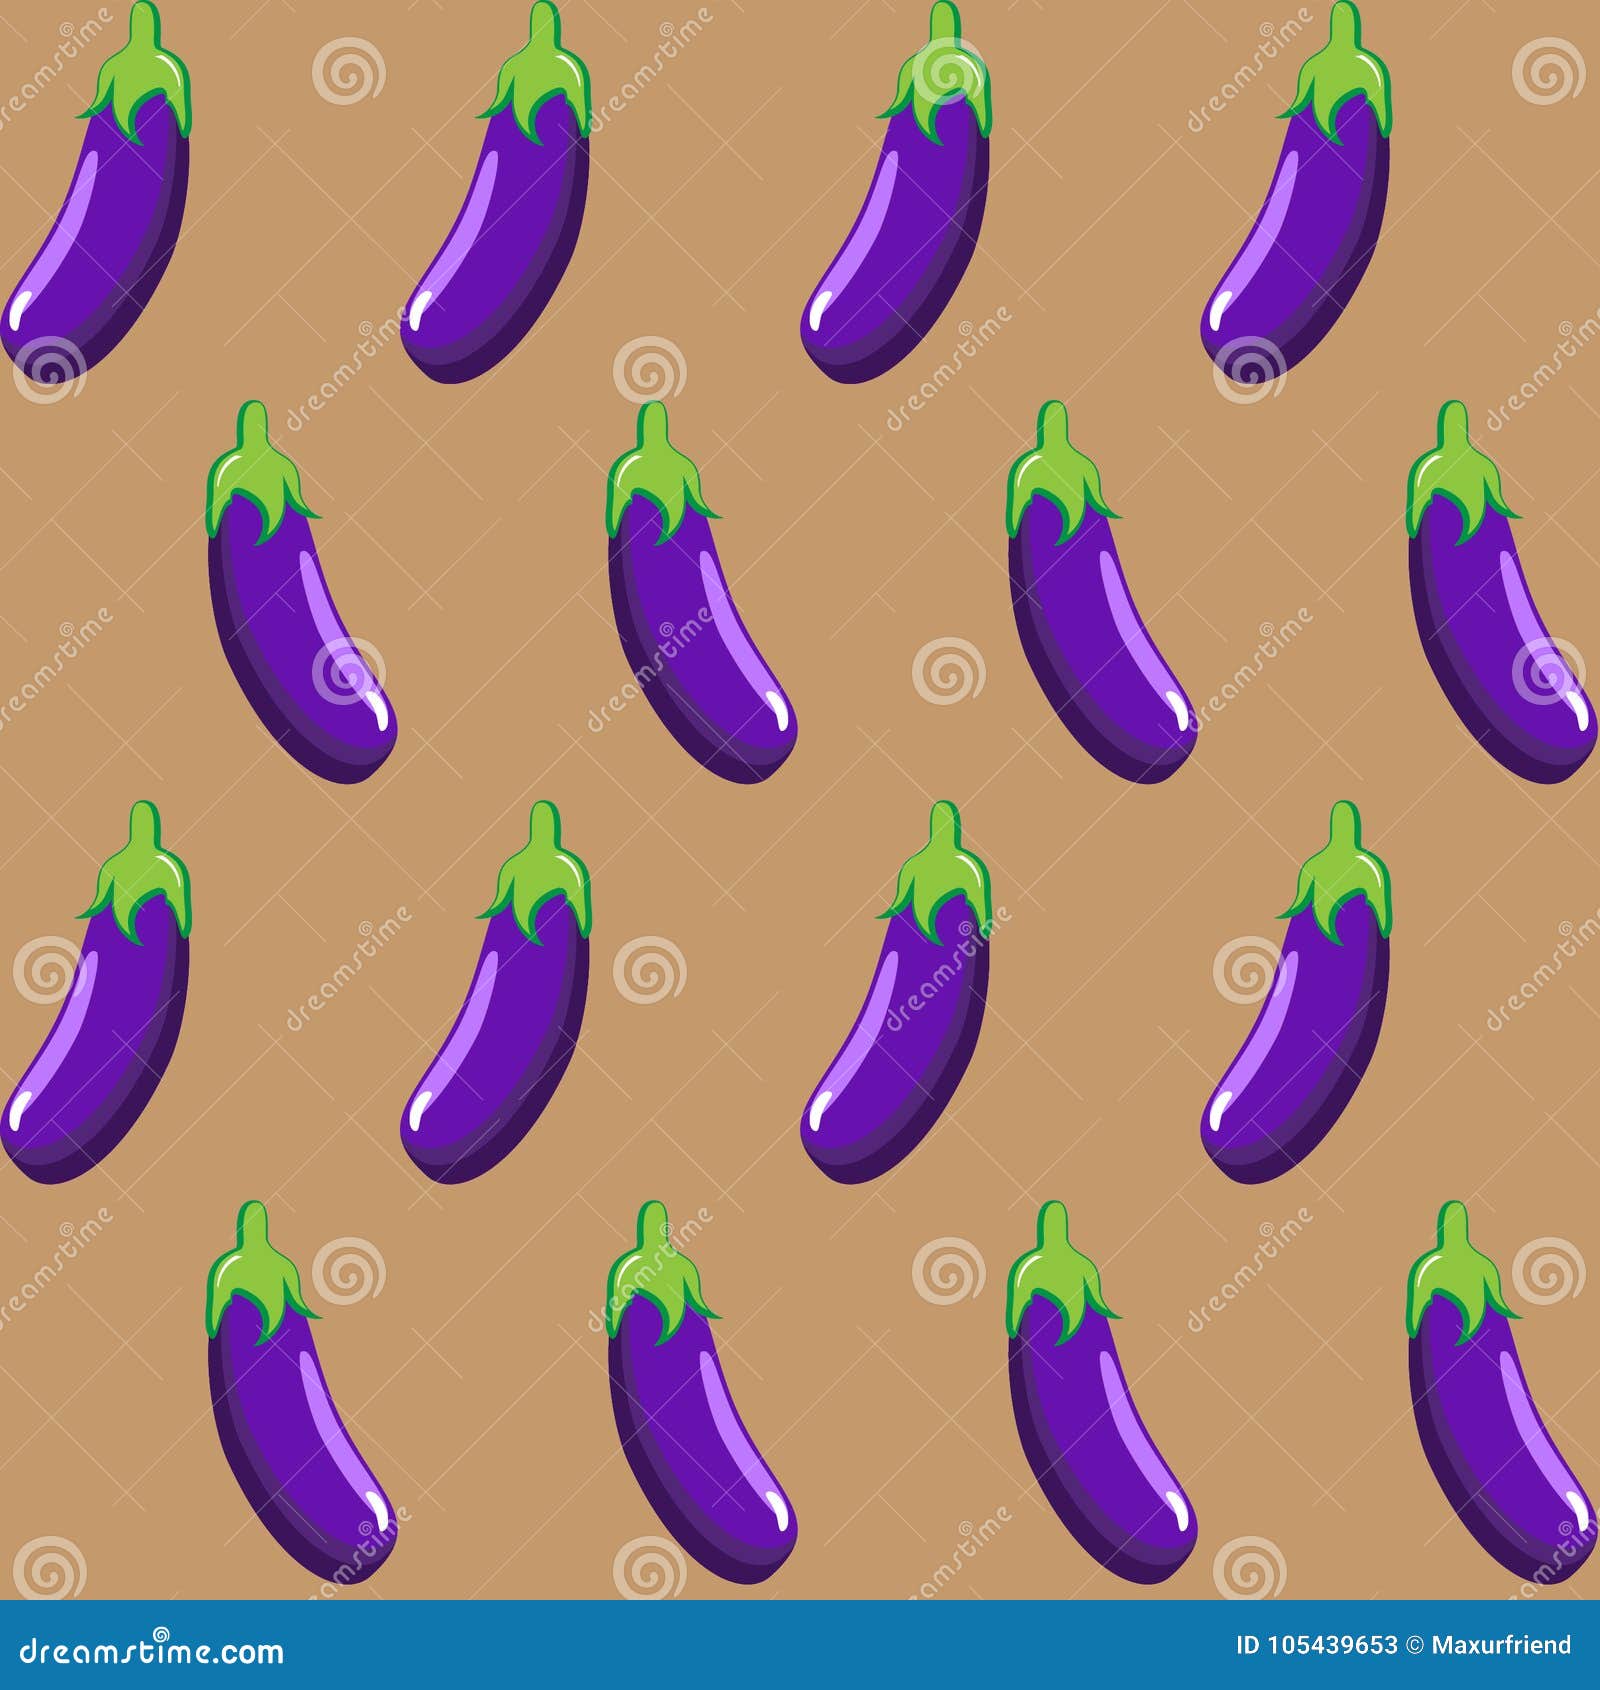 Cooking Eggplant What Mistakes Should You Avoid aesthetic eggplant HD  wallpaper  Pxfuel